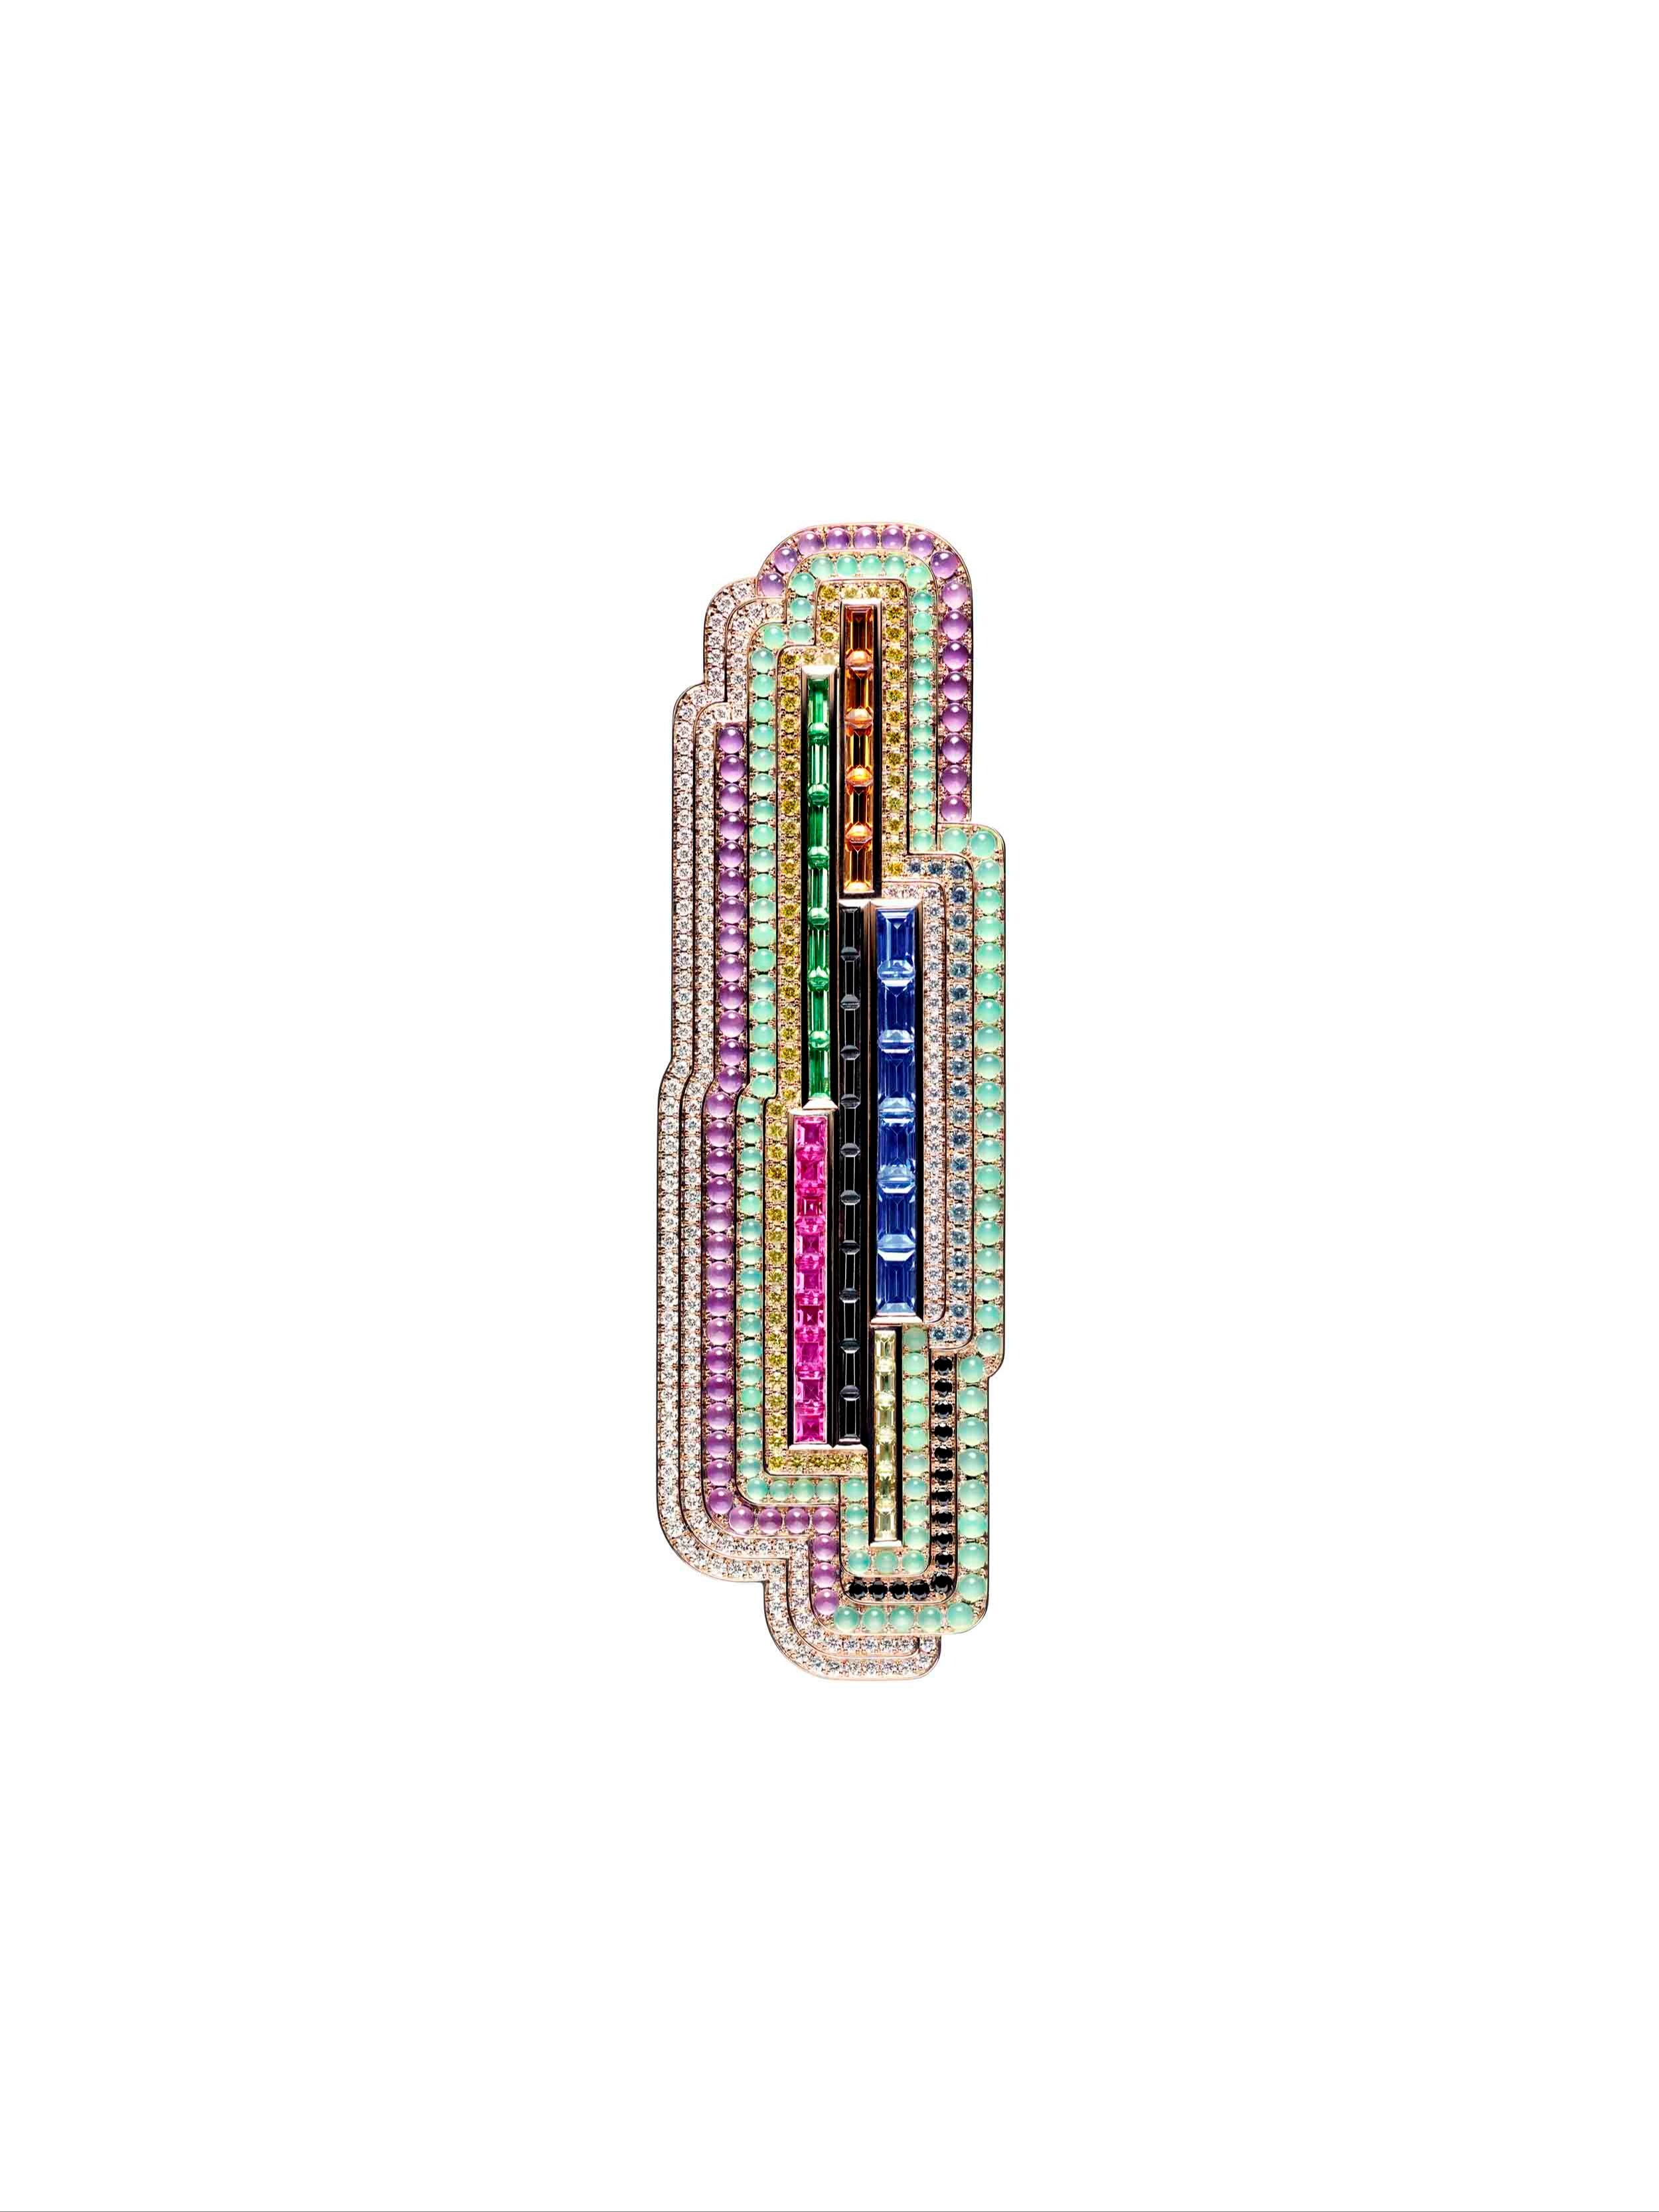 Color Flash: Rose gold brooch set with rubies, yellow, blue and green sapphires, tsavorite and spessartite garnets, black spinels, chrysoprases, amethysts, and diamonds